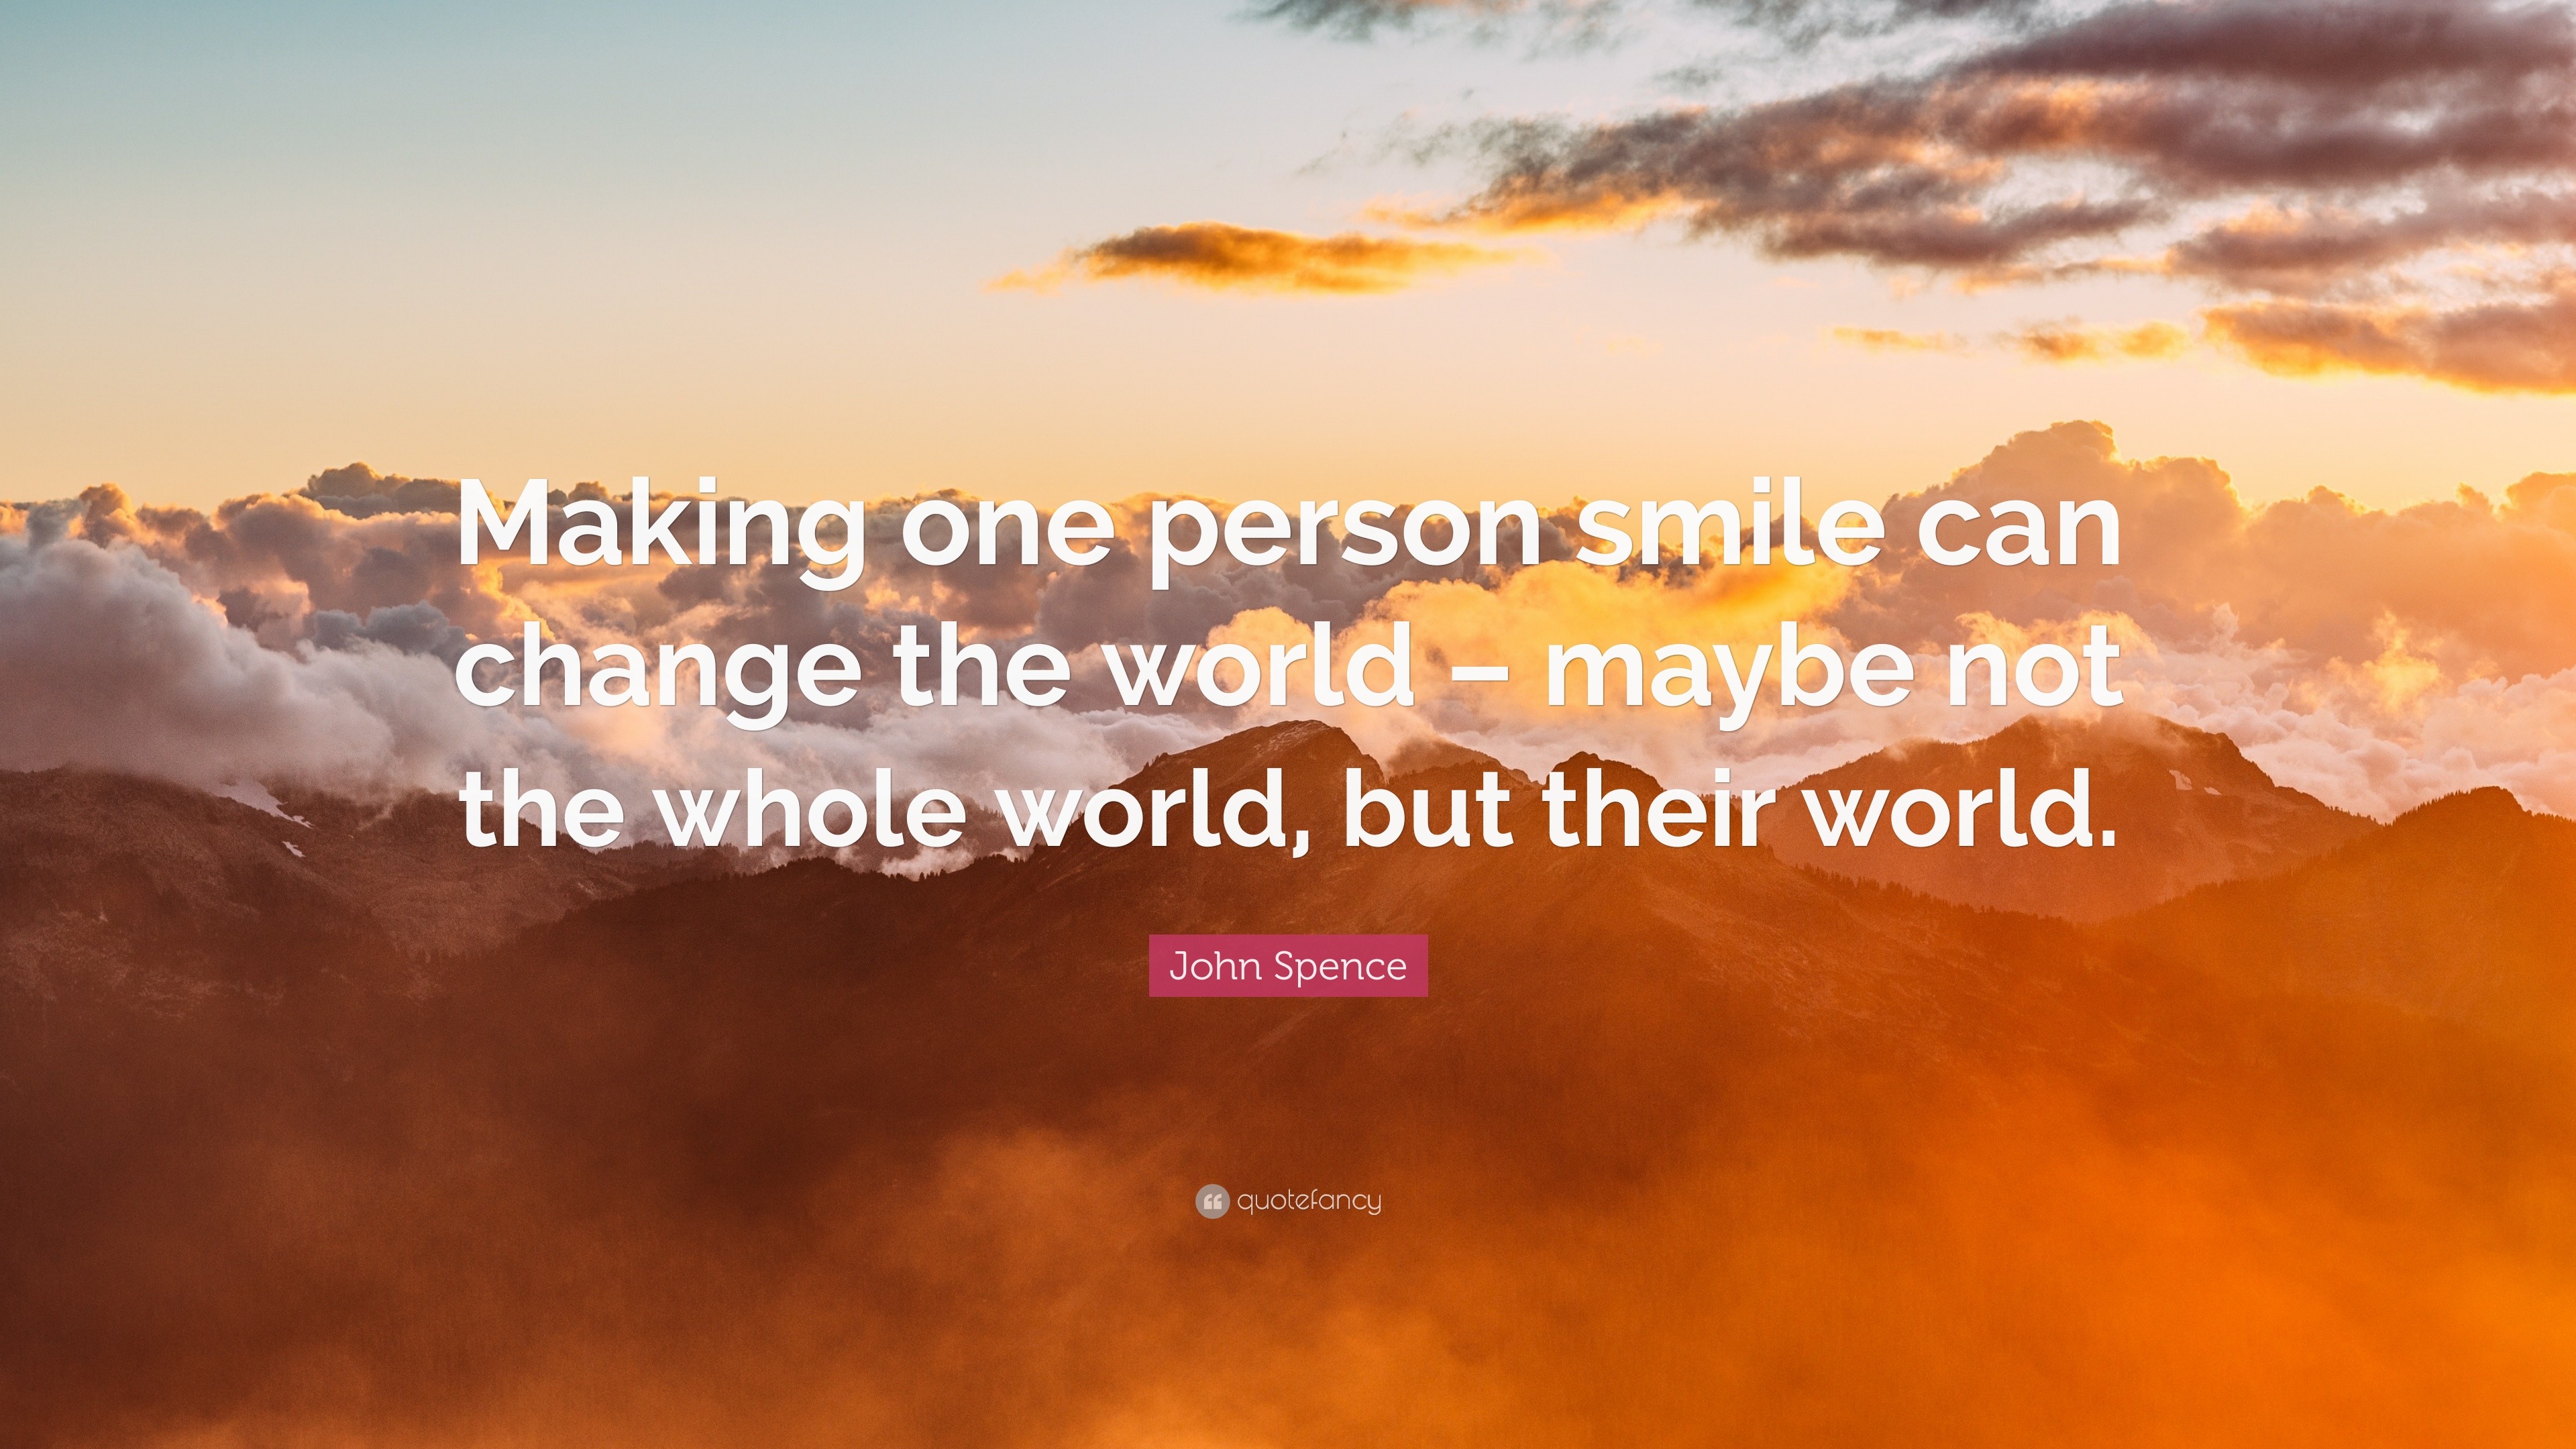 John Spence Quote: “Making one person smile can change the world